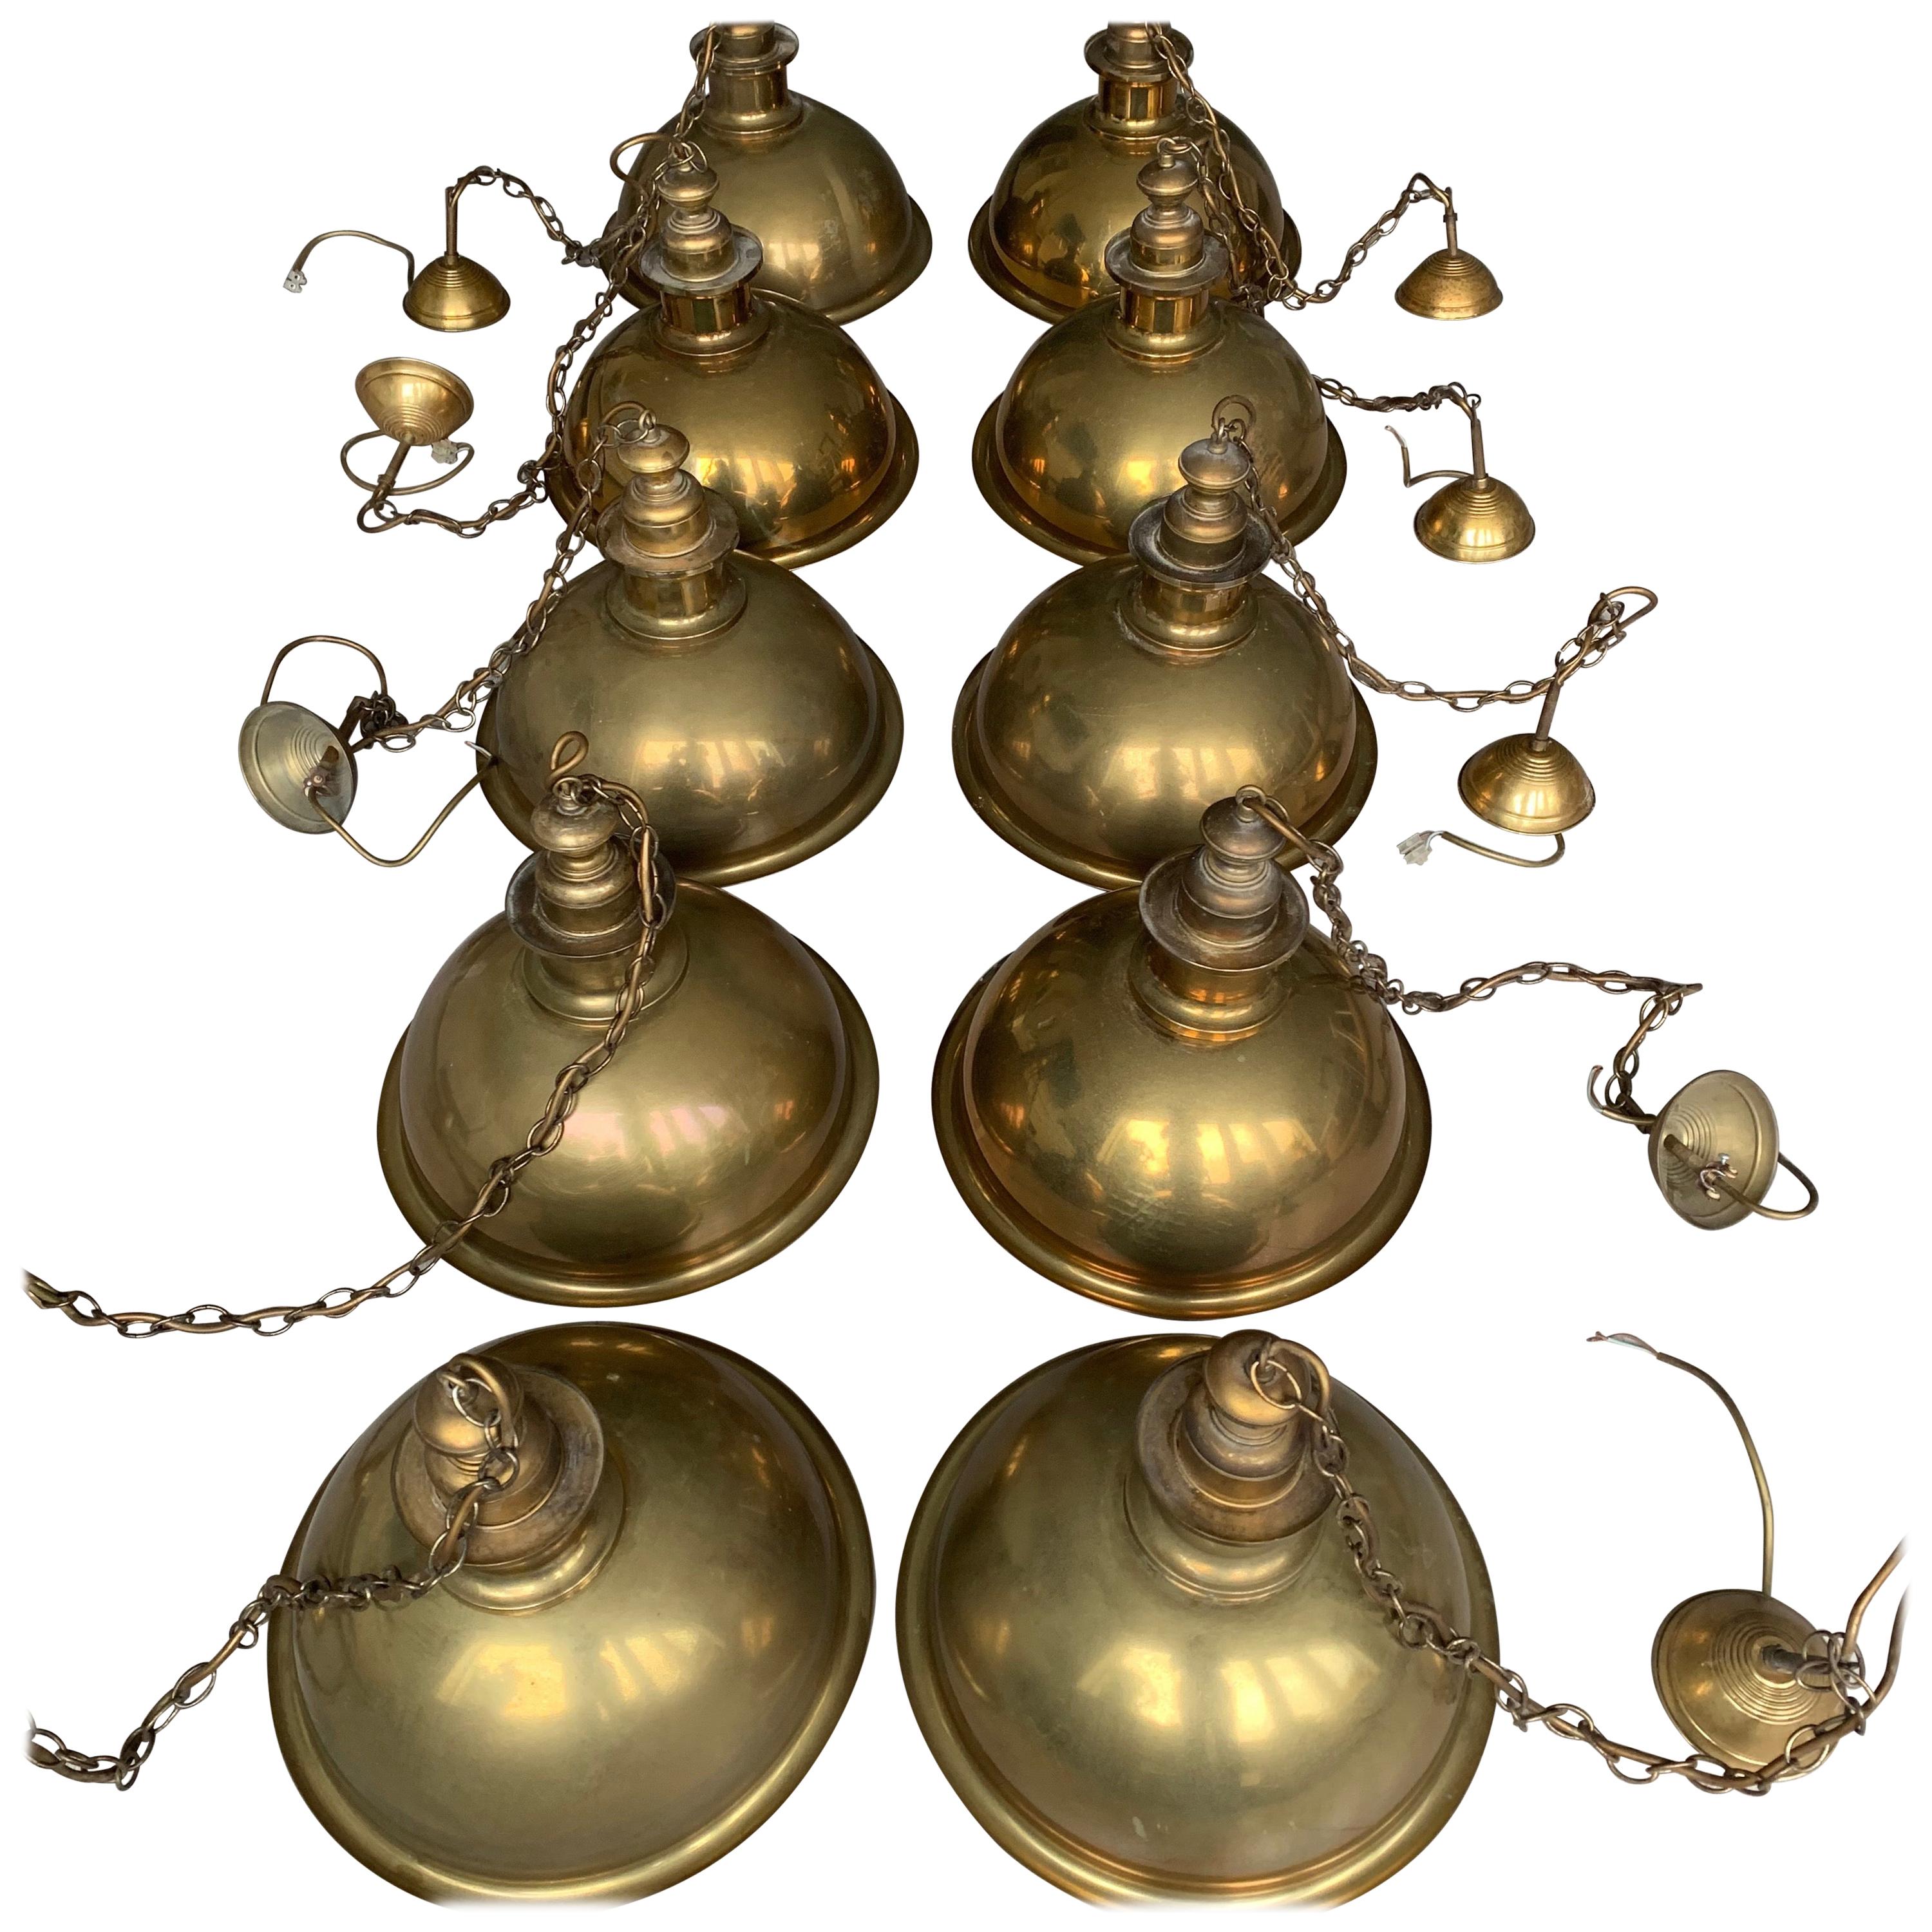 Marvellous, perfect size and shape pendants from the midcentury design era.

These very stylish 1970s light fixtures come with all the original brass canopies intact. They are in a good / used condition and the beautifully patinated brass shades are